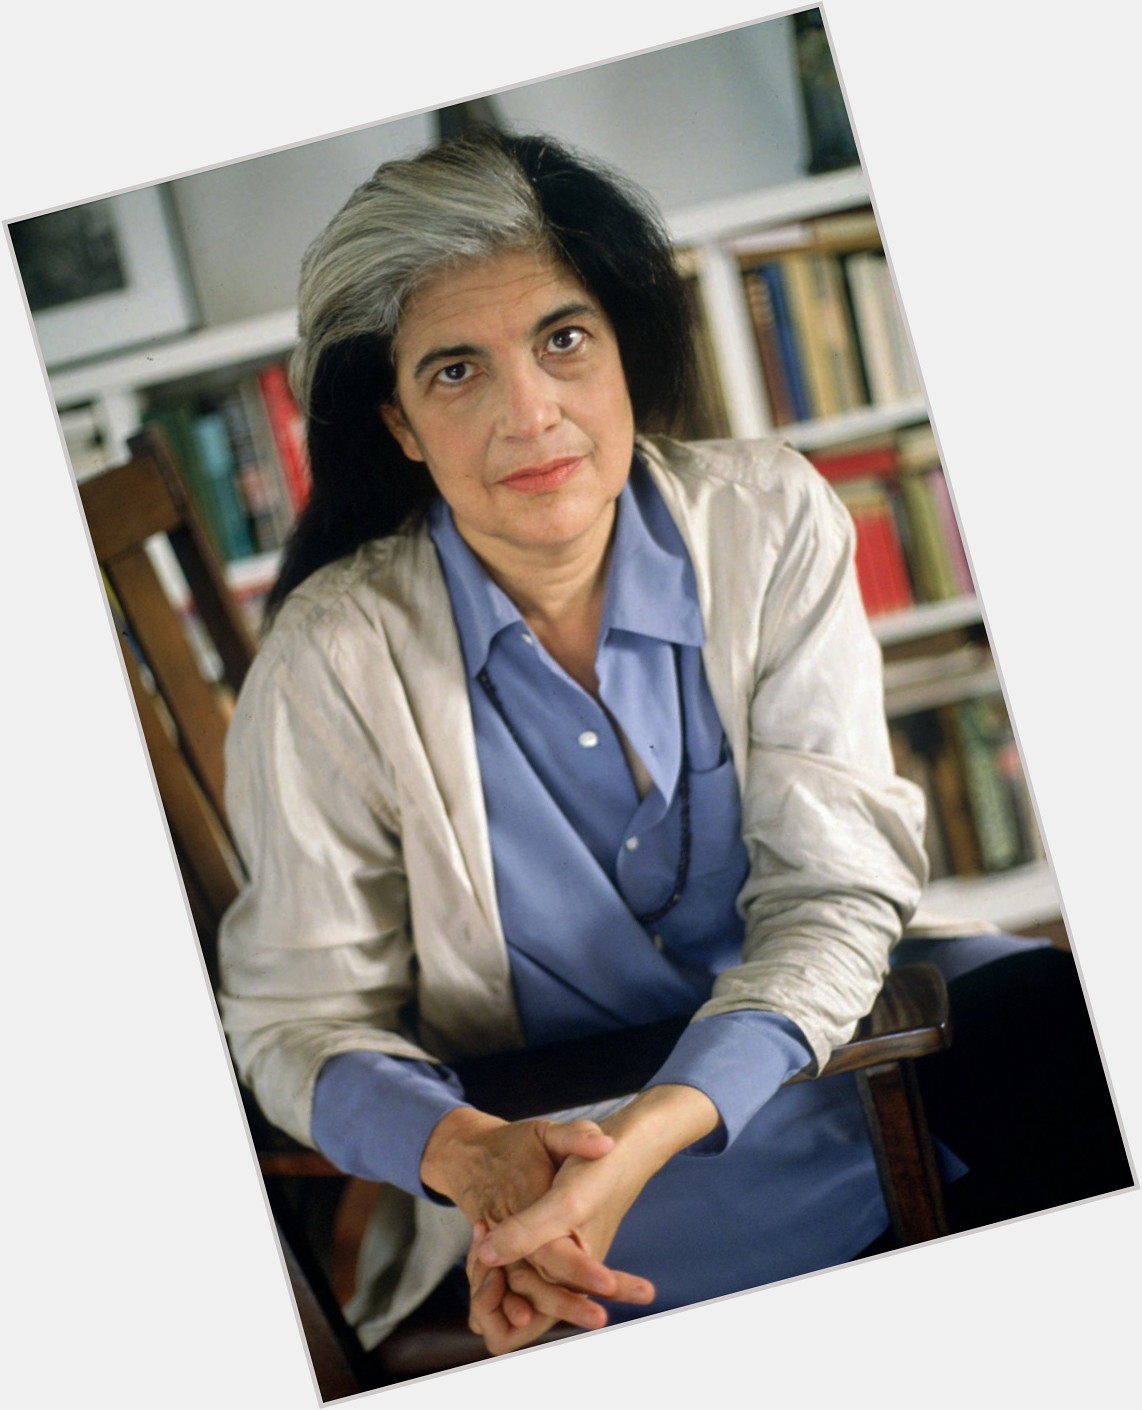 Susan Sontag hairstyle 6